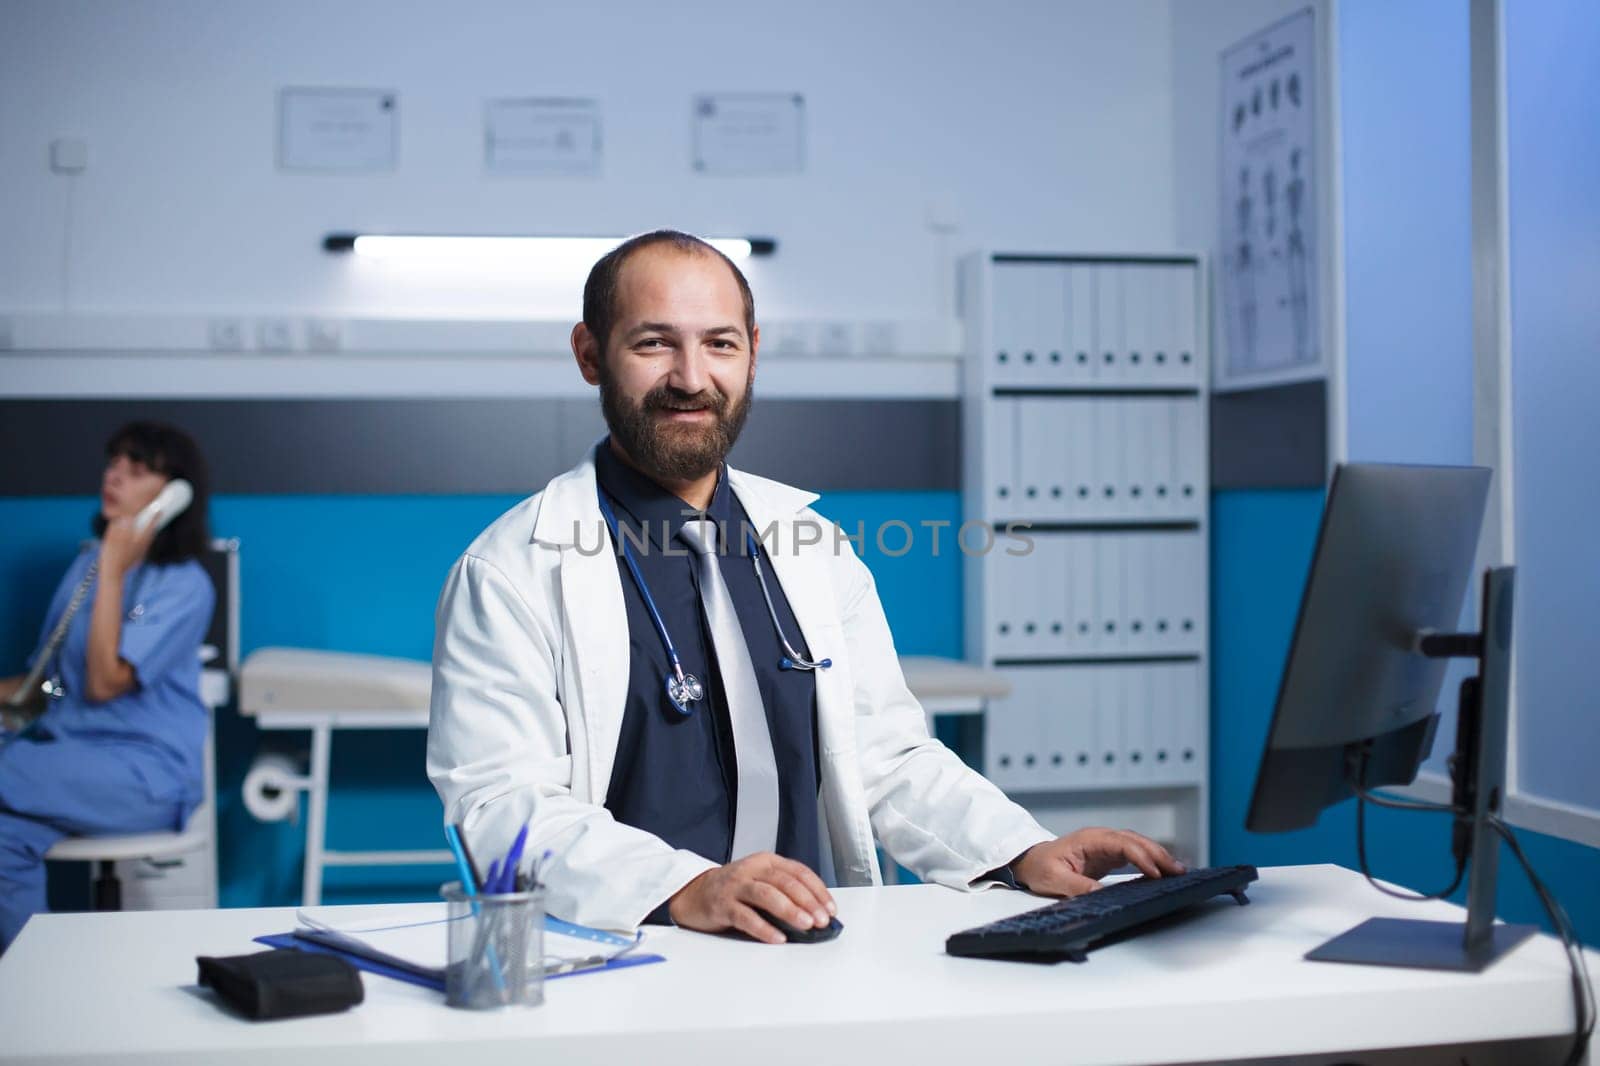 Middle aged doctor smiling at his desk in a medical office. Caucasian male physician appears to be wearing a white lab coat, female nurse is in the background on a call. Portrait shot.